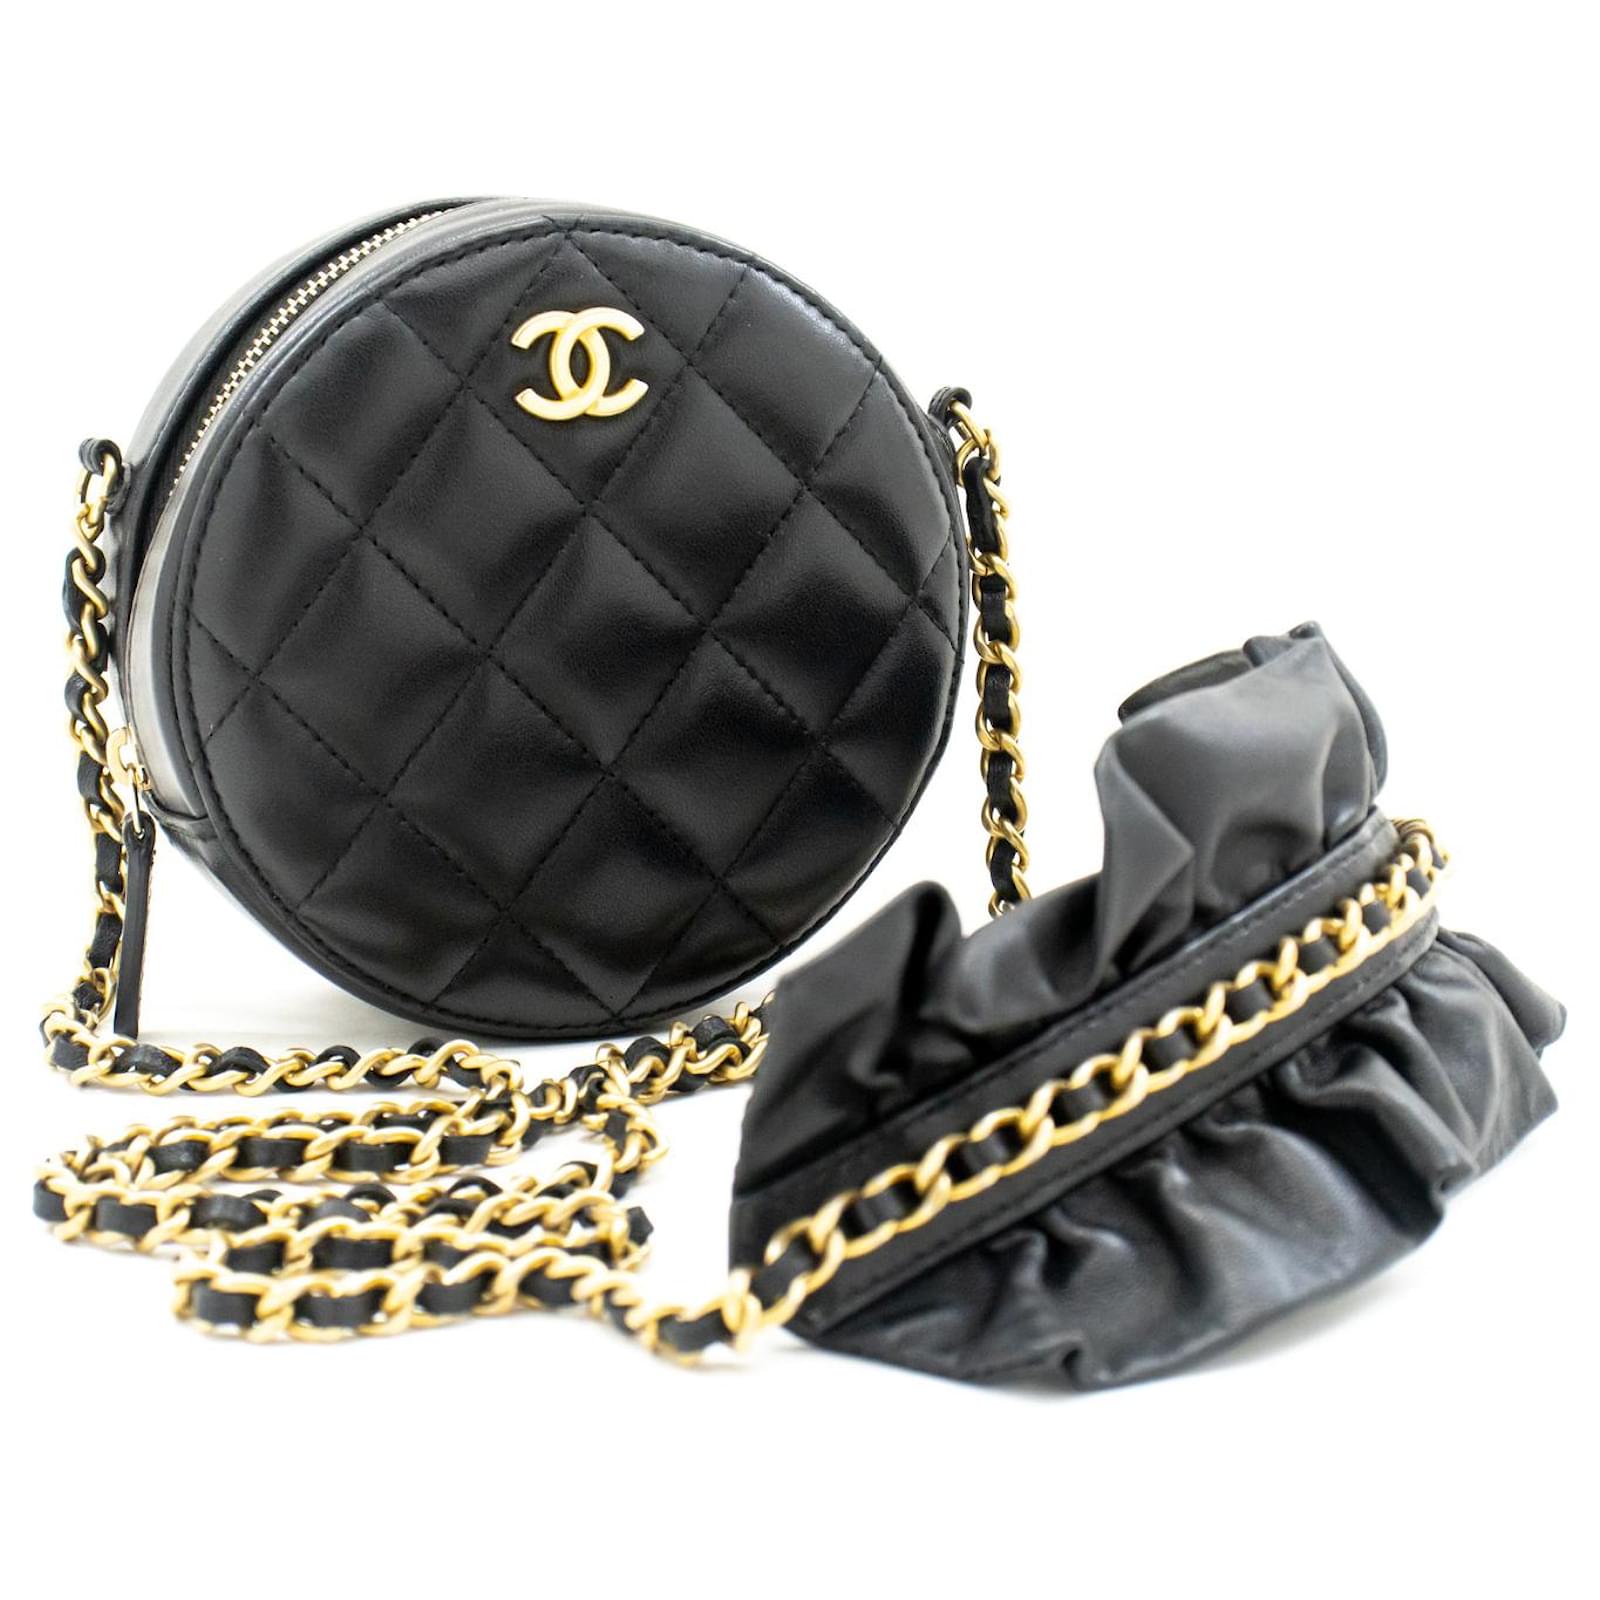 Handbags Chanel Chanel Round Zip Small Chain Shoulder Bag Black Quilted Lambskin